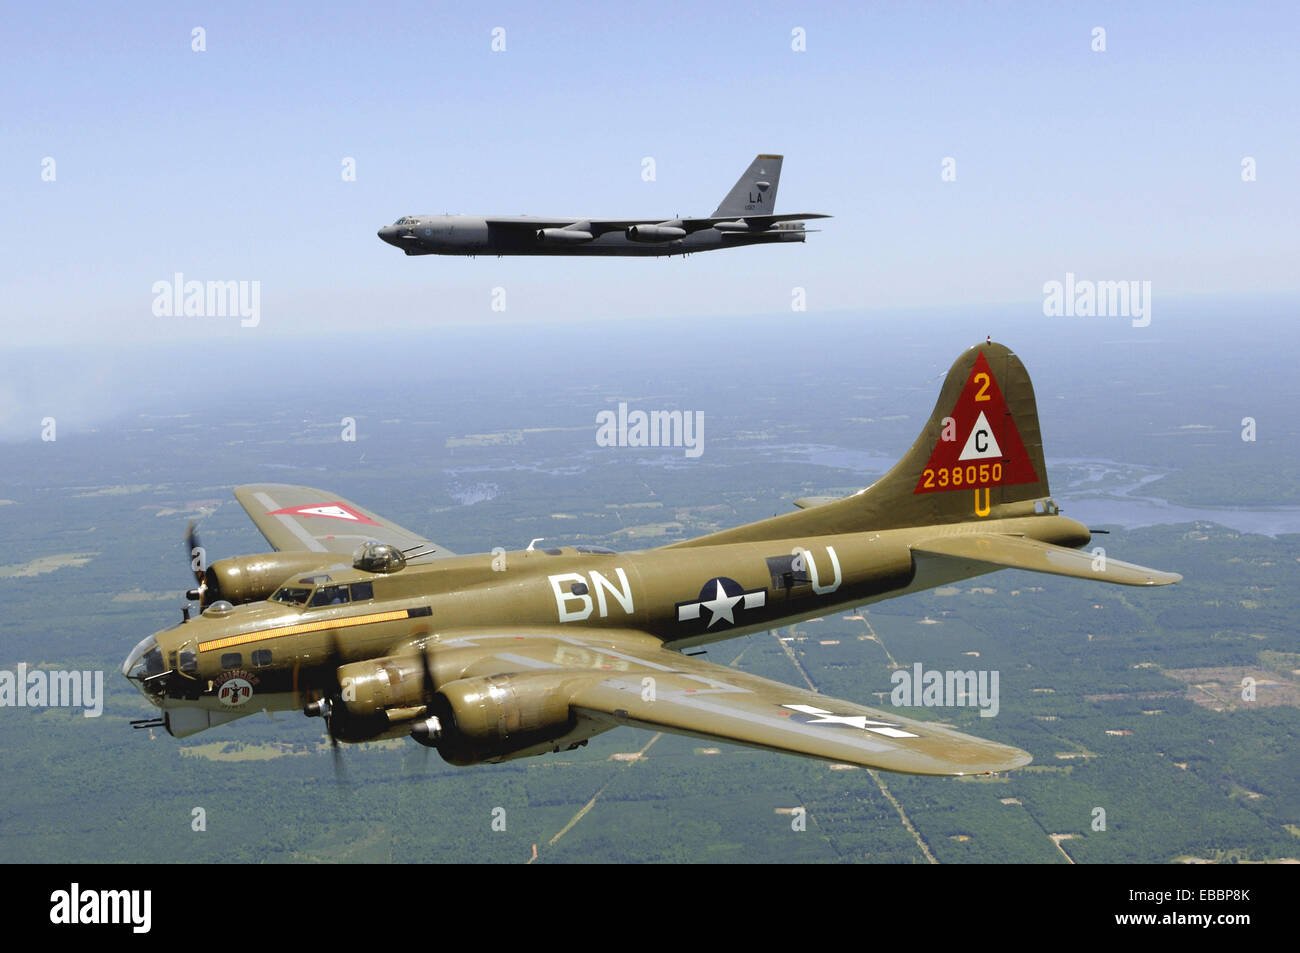 A B-17G Flying Fortress nicknamed ´Thunderchief´ participates in a heritage flight with a B-52H Stratofortress from the 2nd Stock Photo